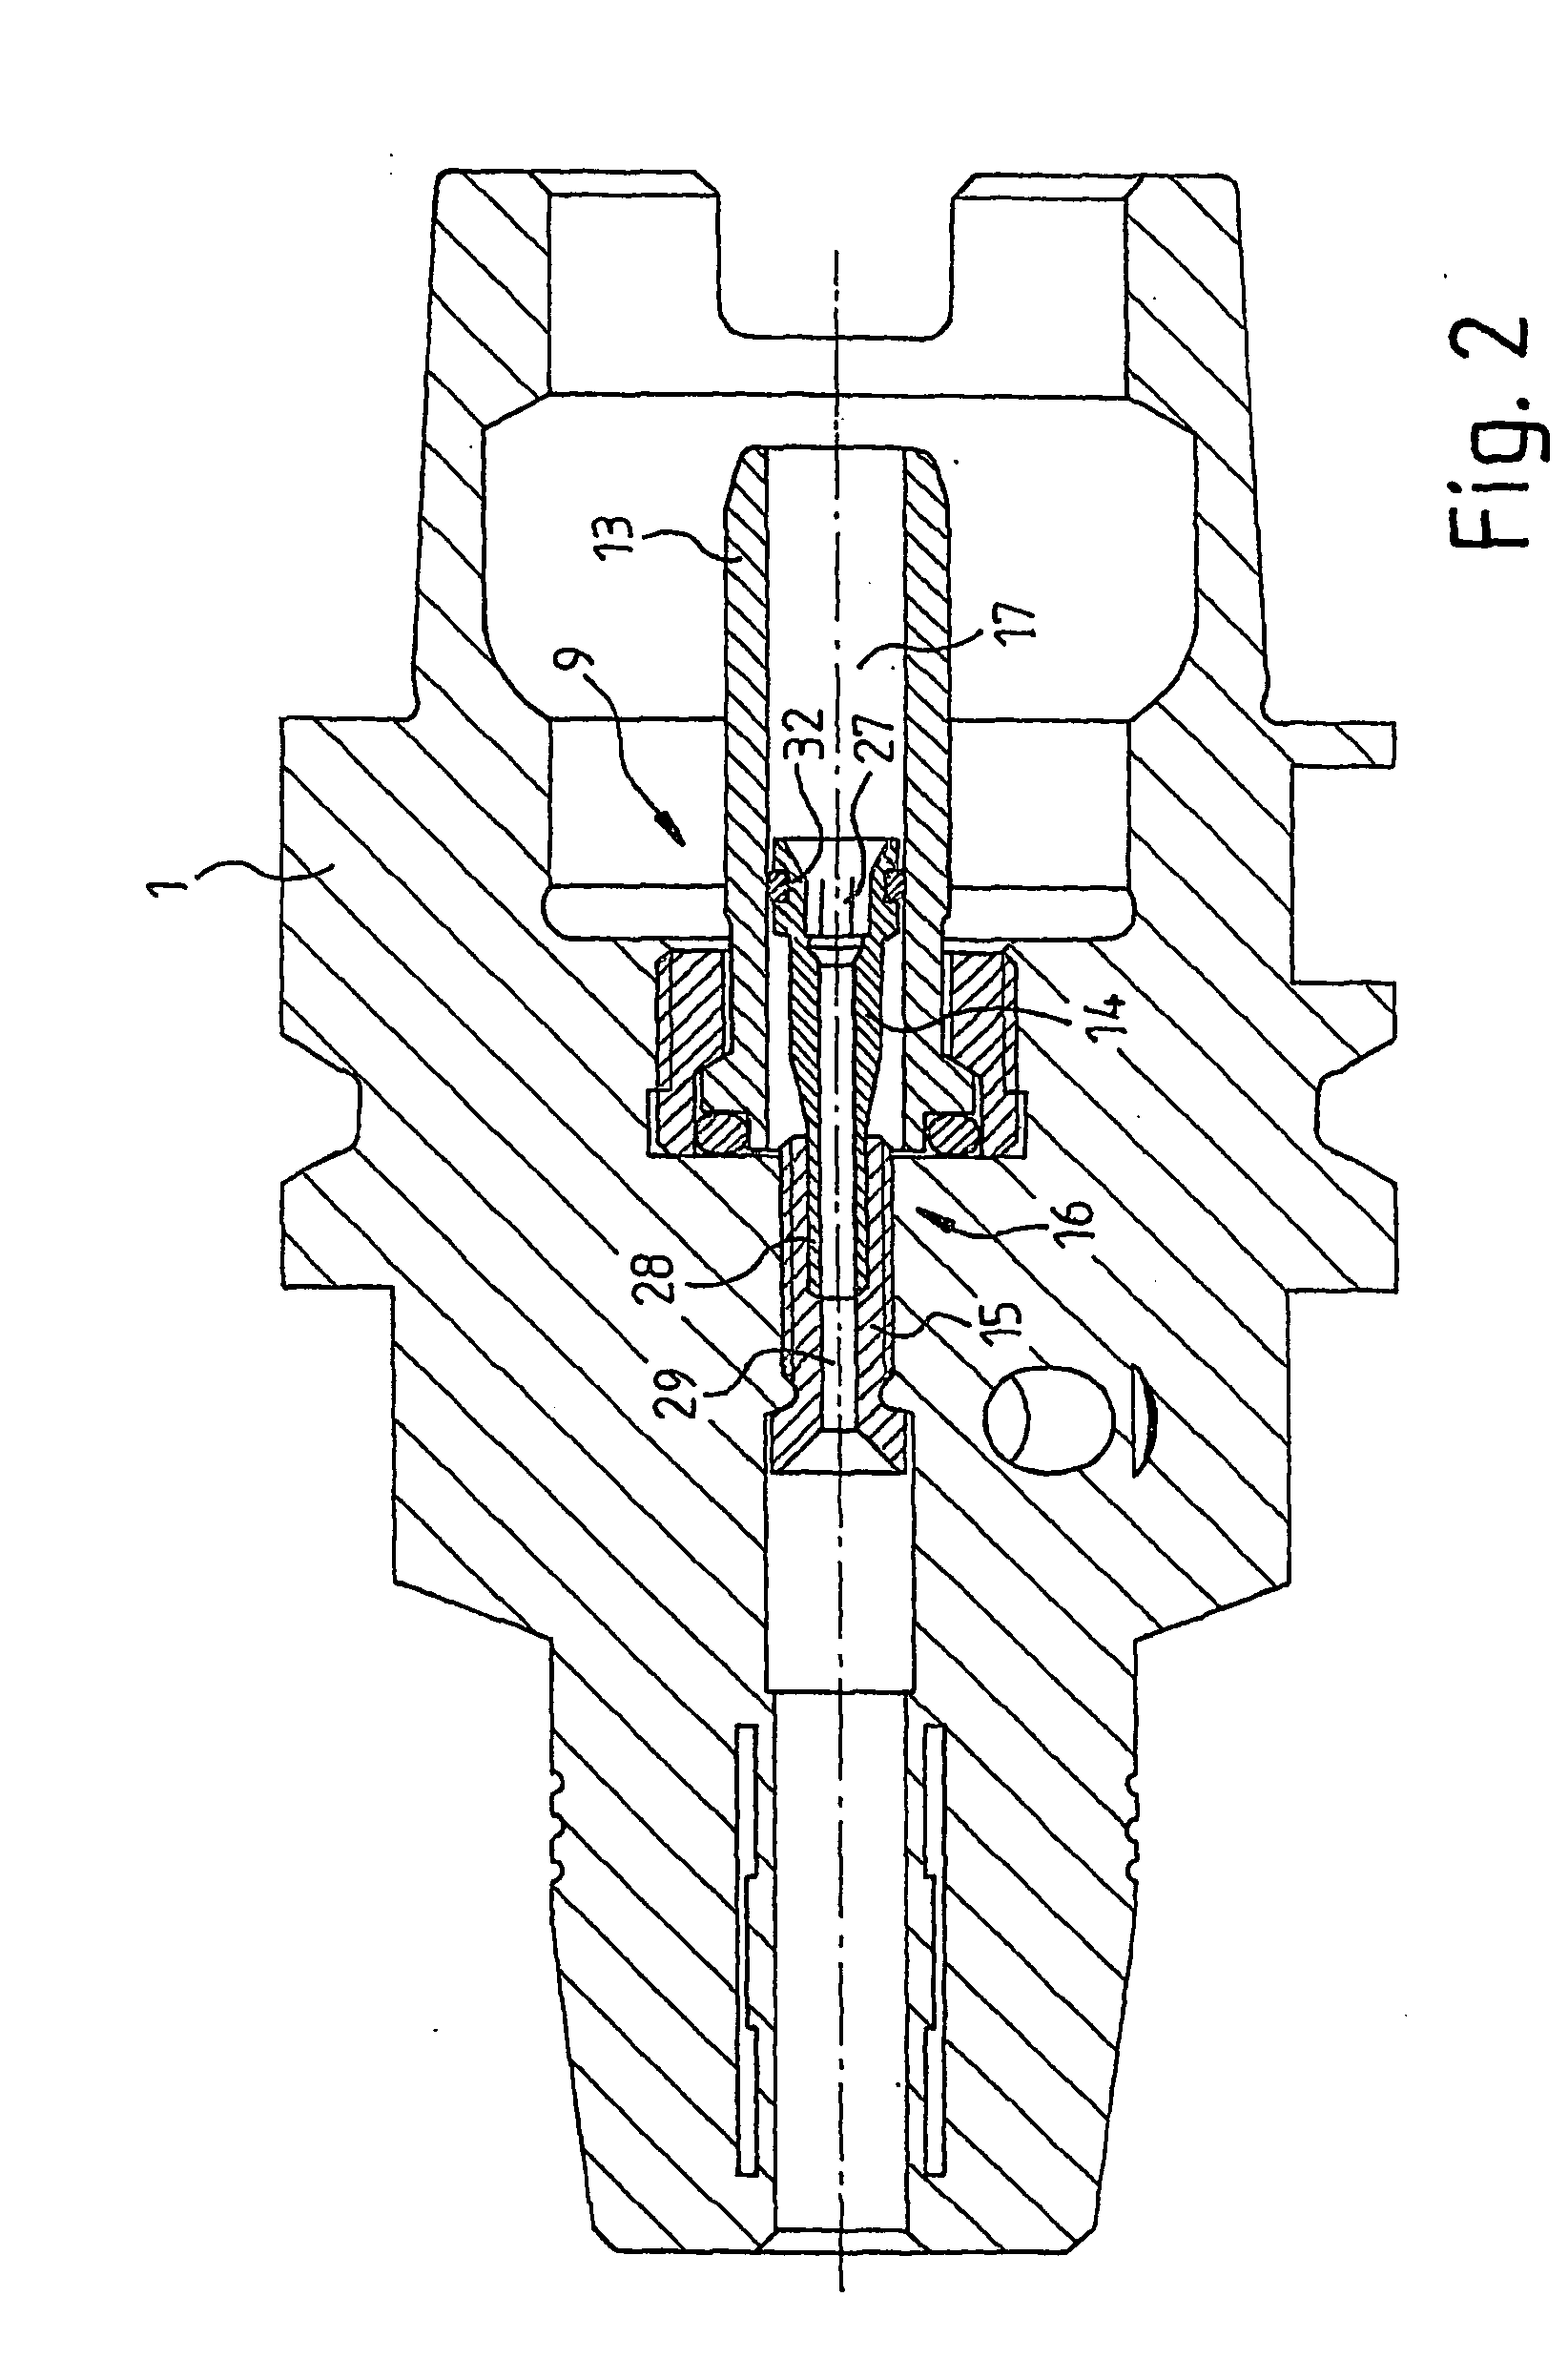 Depth adjustment for a clamping chuck